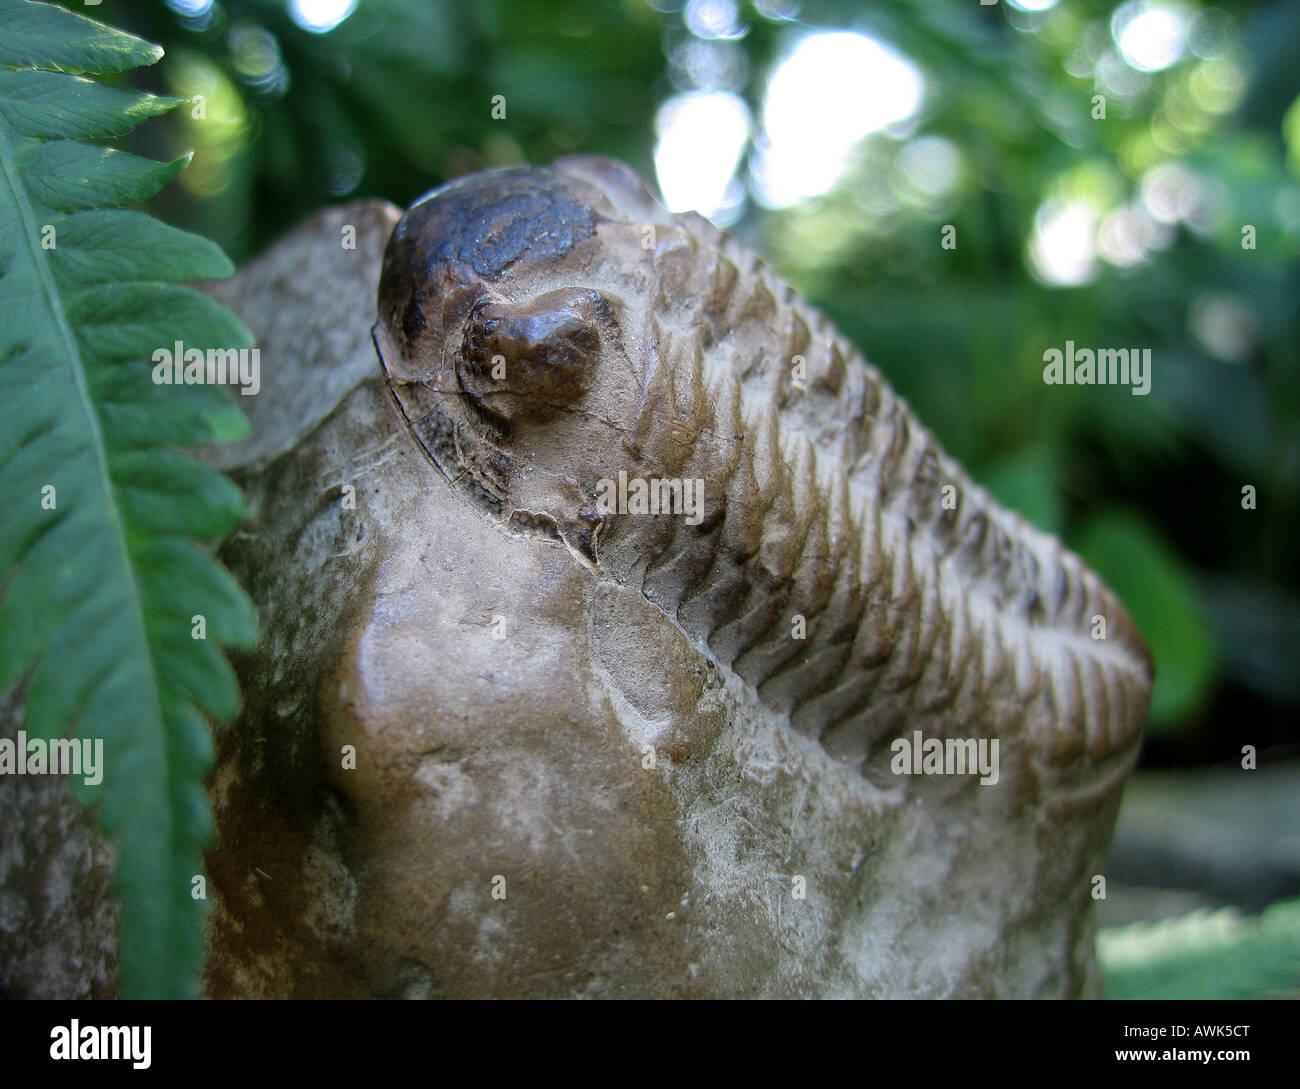 An extremely well preserved trilobite fossil among ferns with remnants of its shell still visible below its eye. Stock Photo